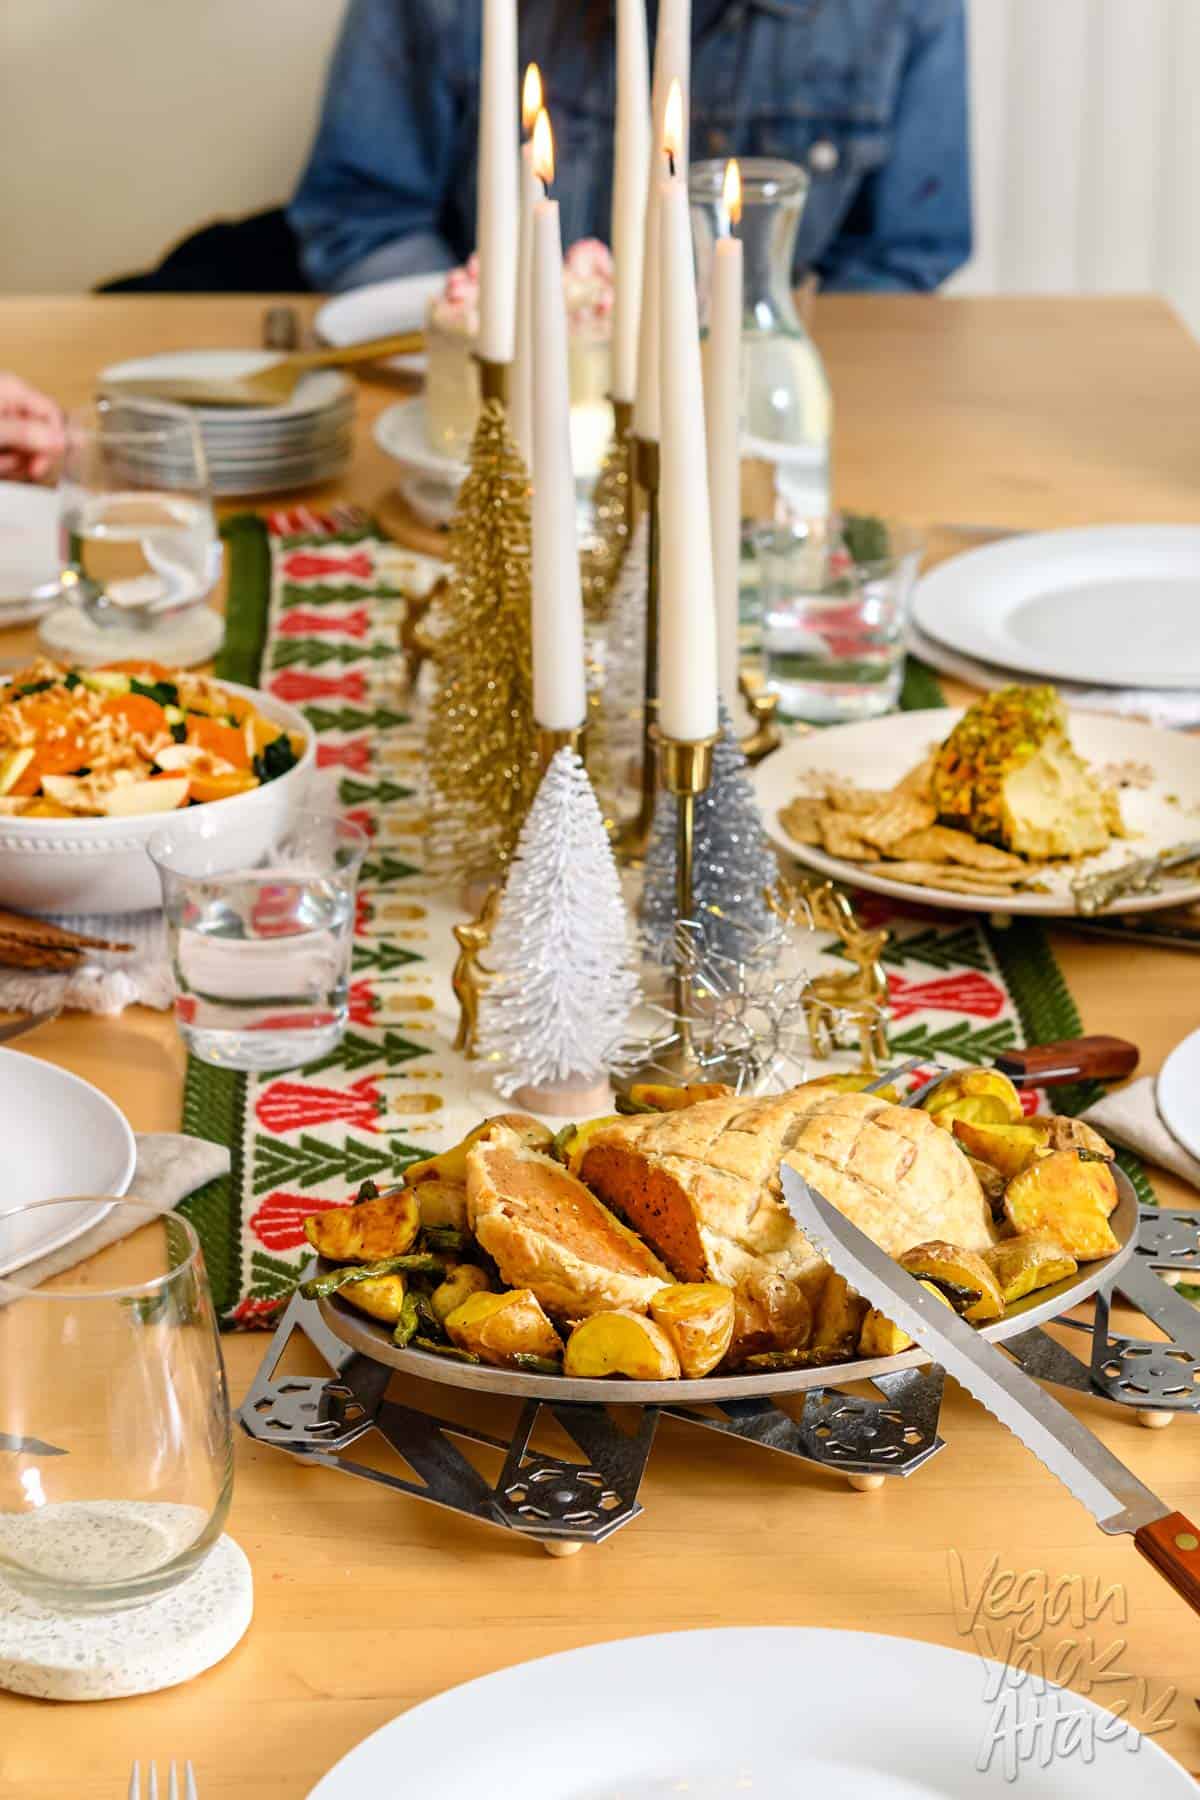 Image of an ultimate vegan holiday dinner spread with table runner and dishes, including salad and sliced seitan Wellington